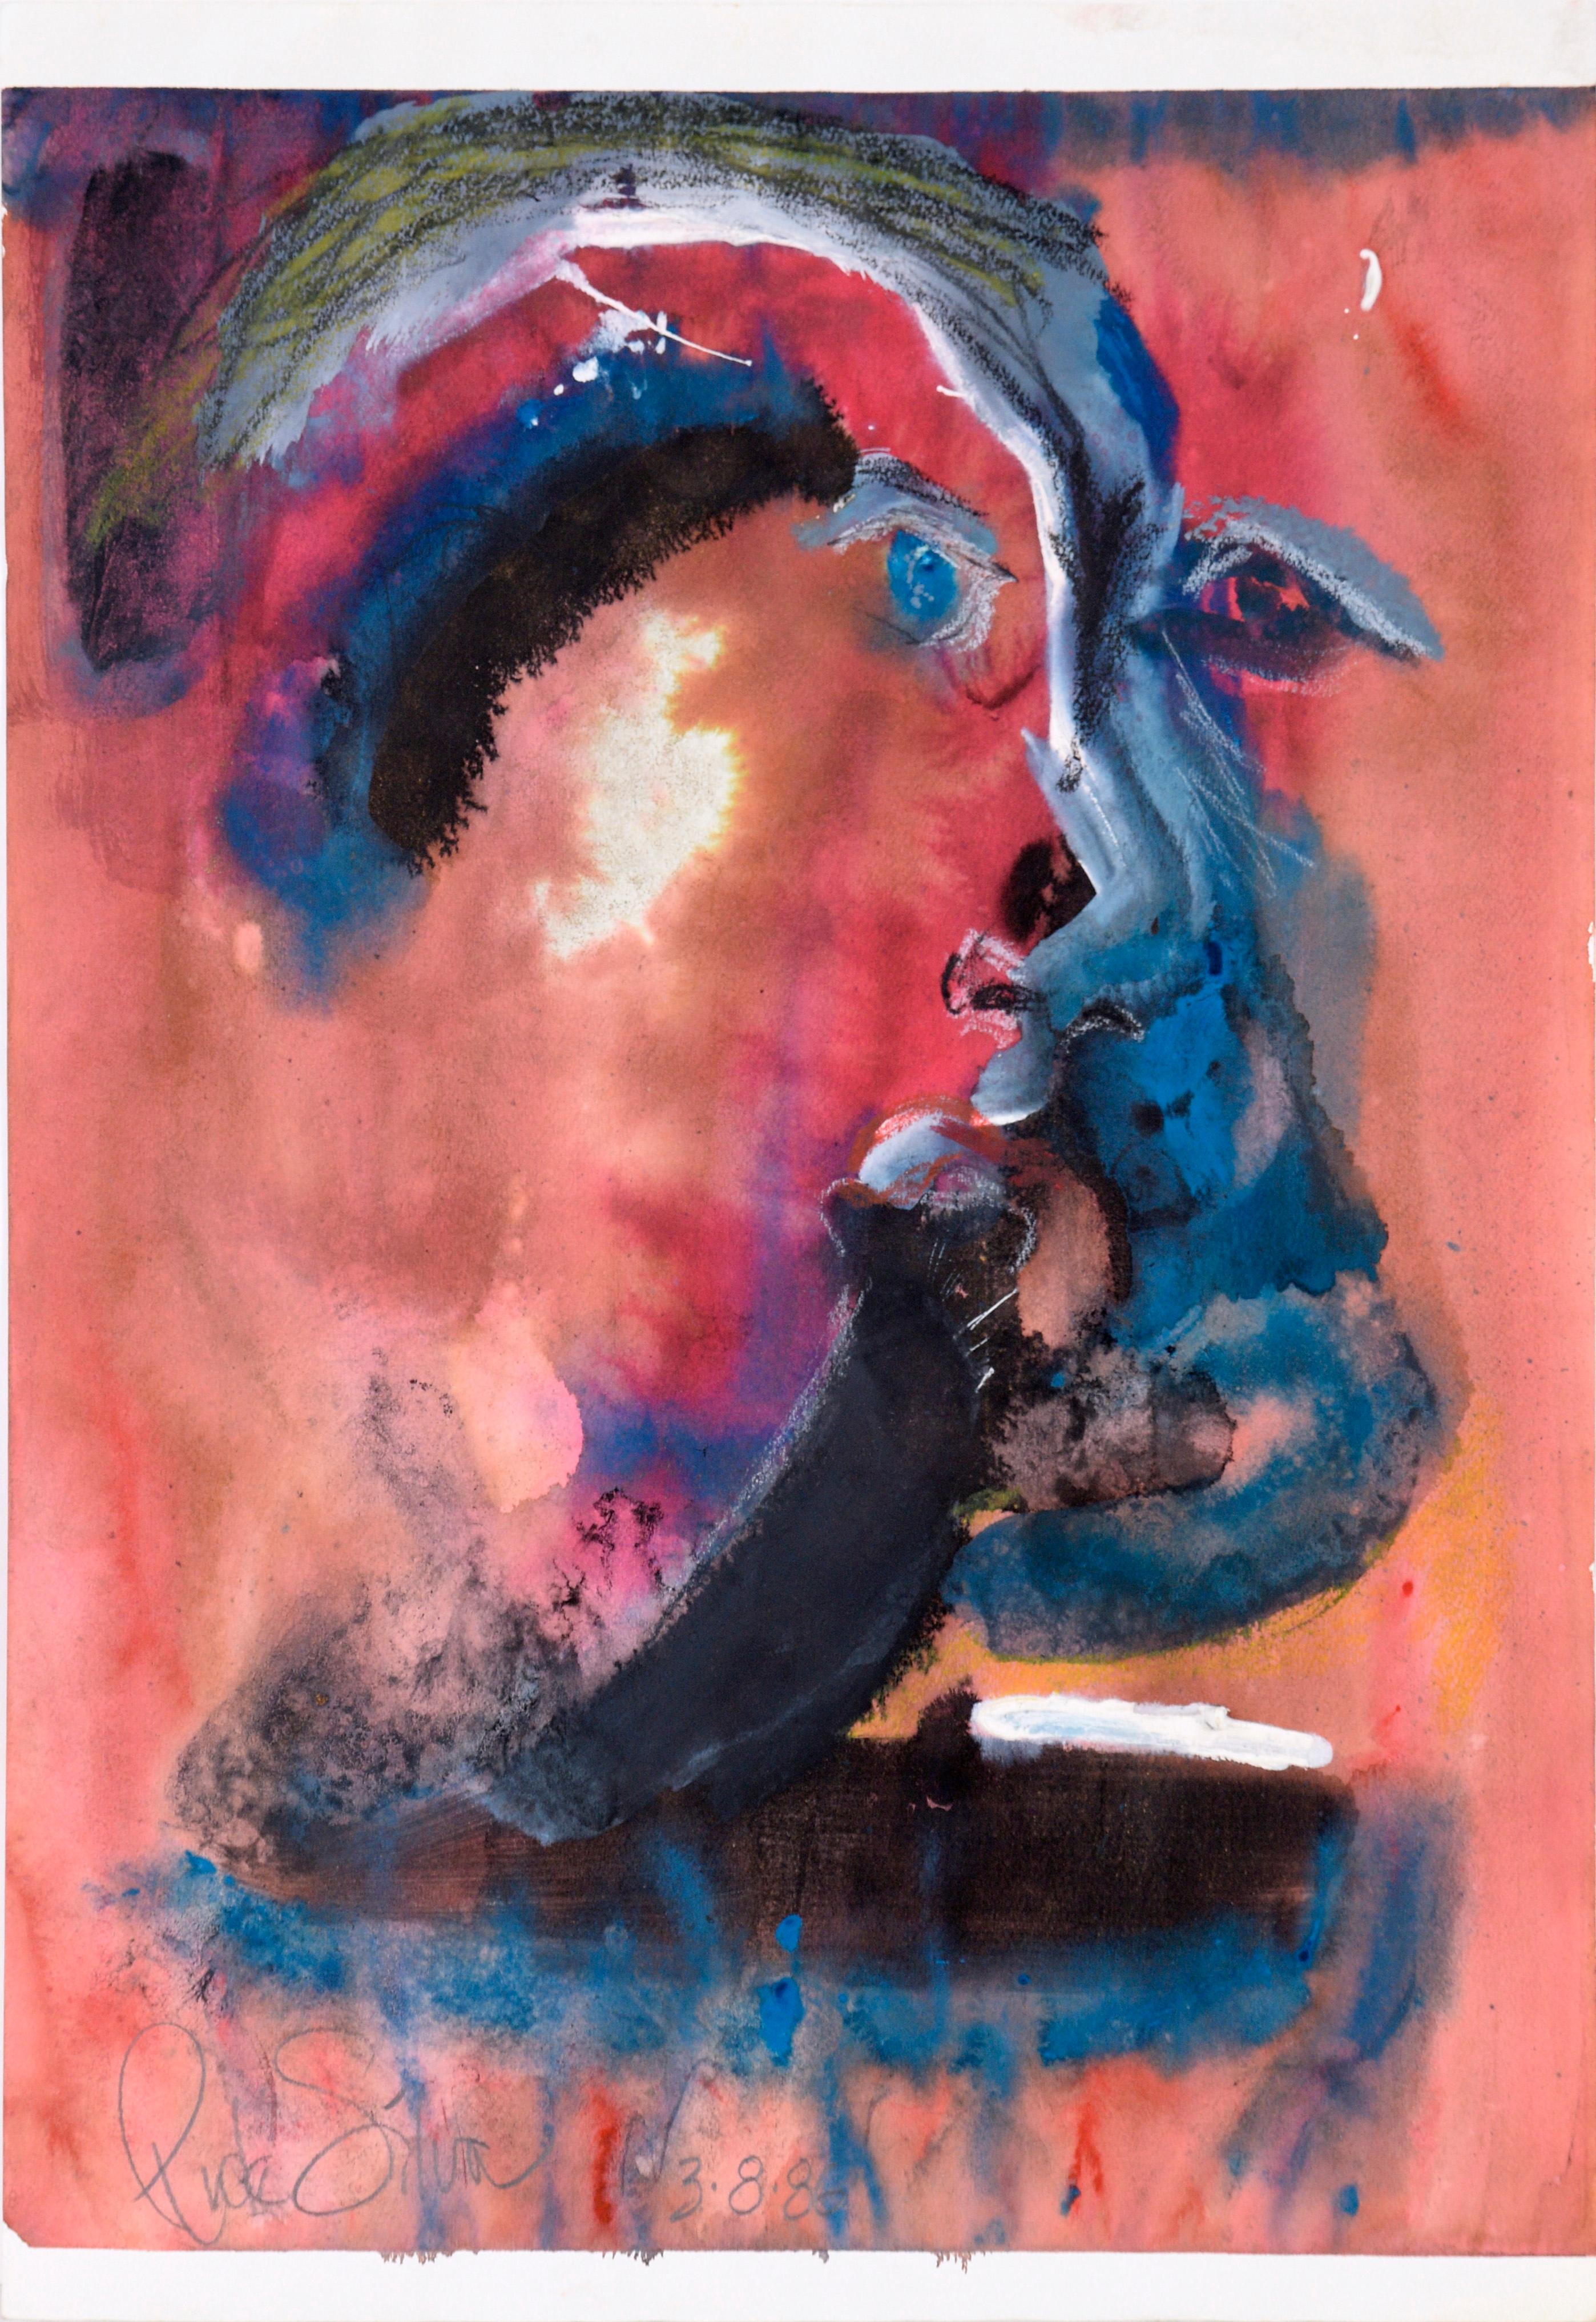 Ricardo de Silva Abstract Painting - Abstract Expressionist Self Portrait in in Acrylic and Pastel on Paper